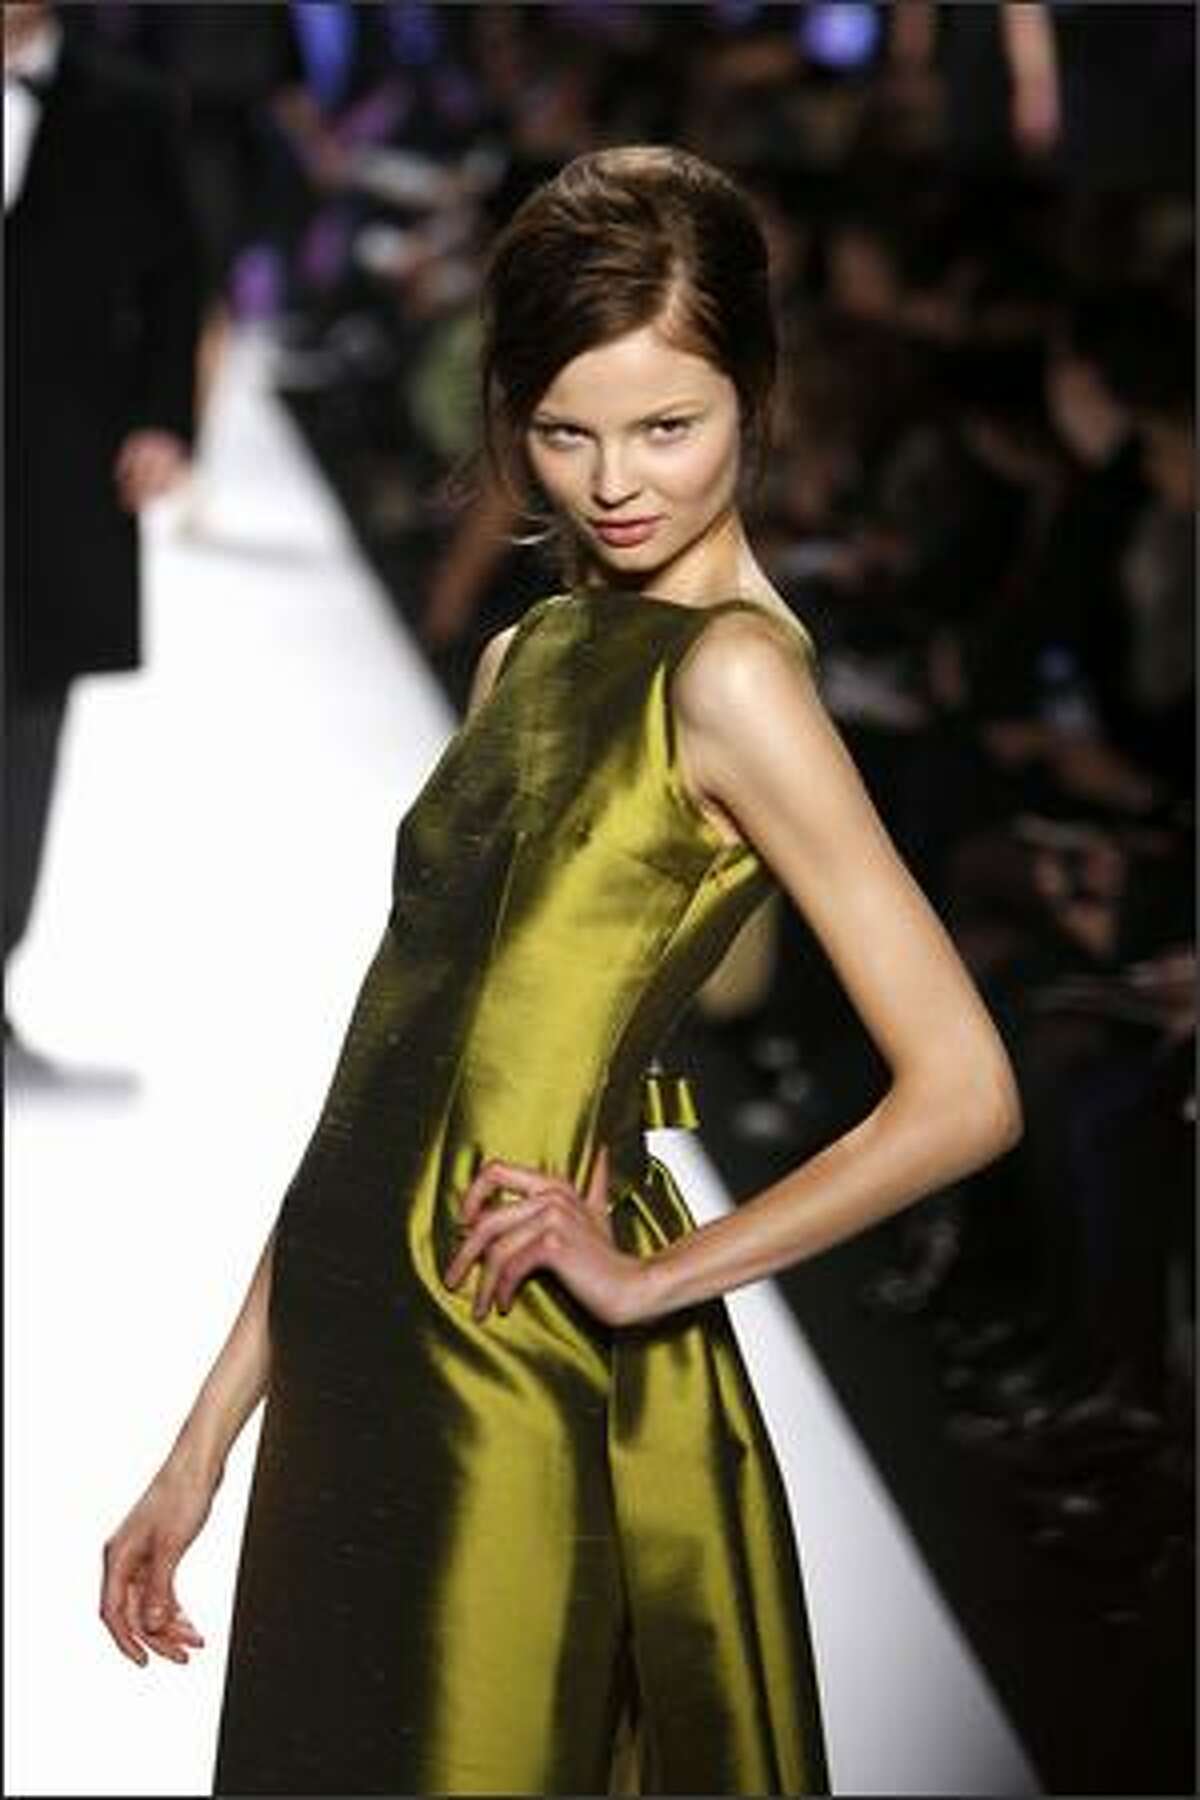 A model walks the runway at the Michael Kors Fall 2008 fashion show during Mercedes-Benz Fashion Week Fall 2008 at The Tent at Bryant Park in New York City.